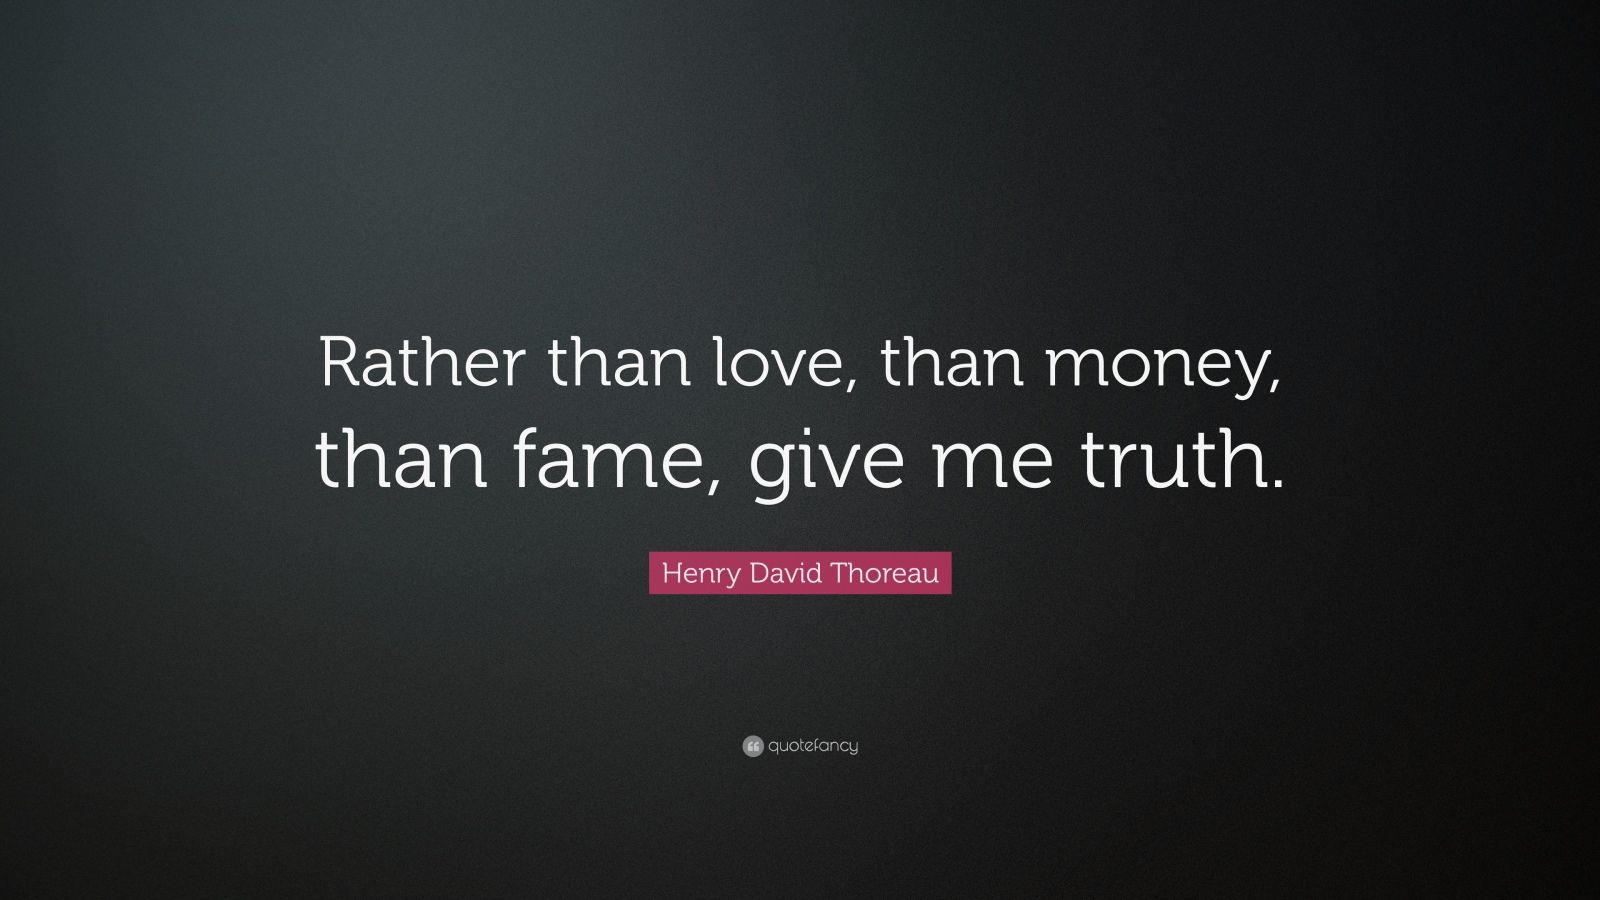 Henry David Thoreau Quote: “Rather than love, than money, than fame ...